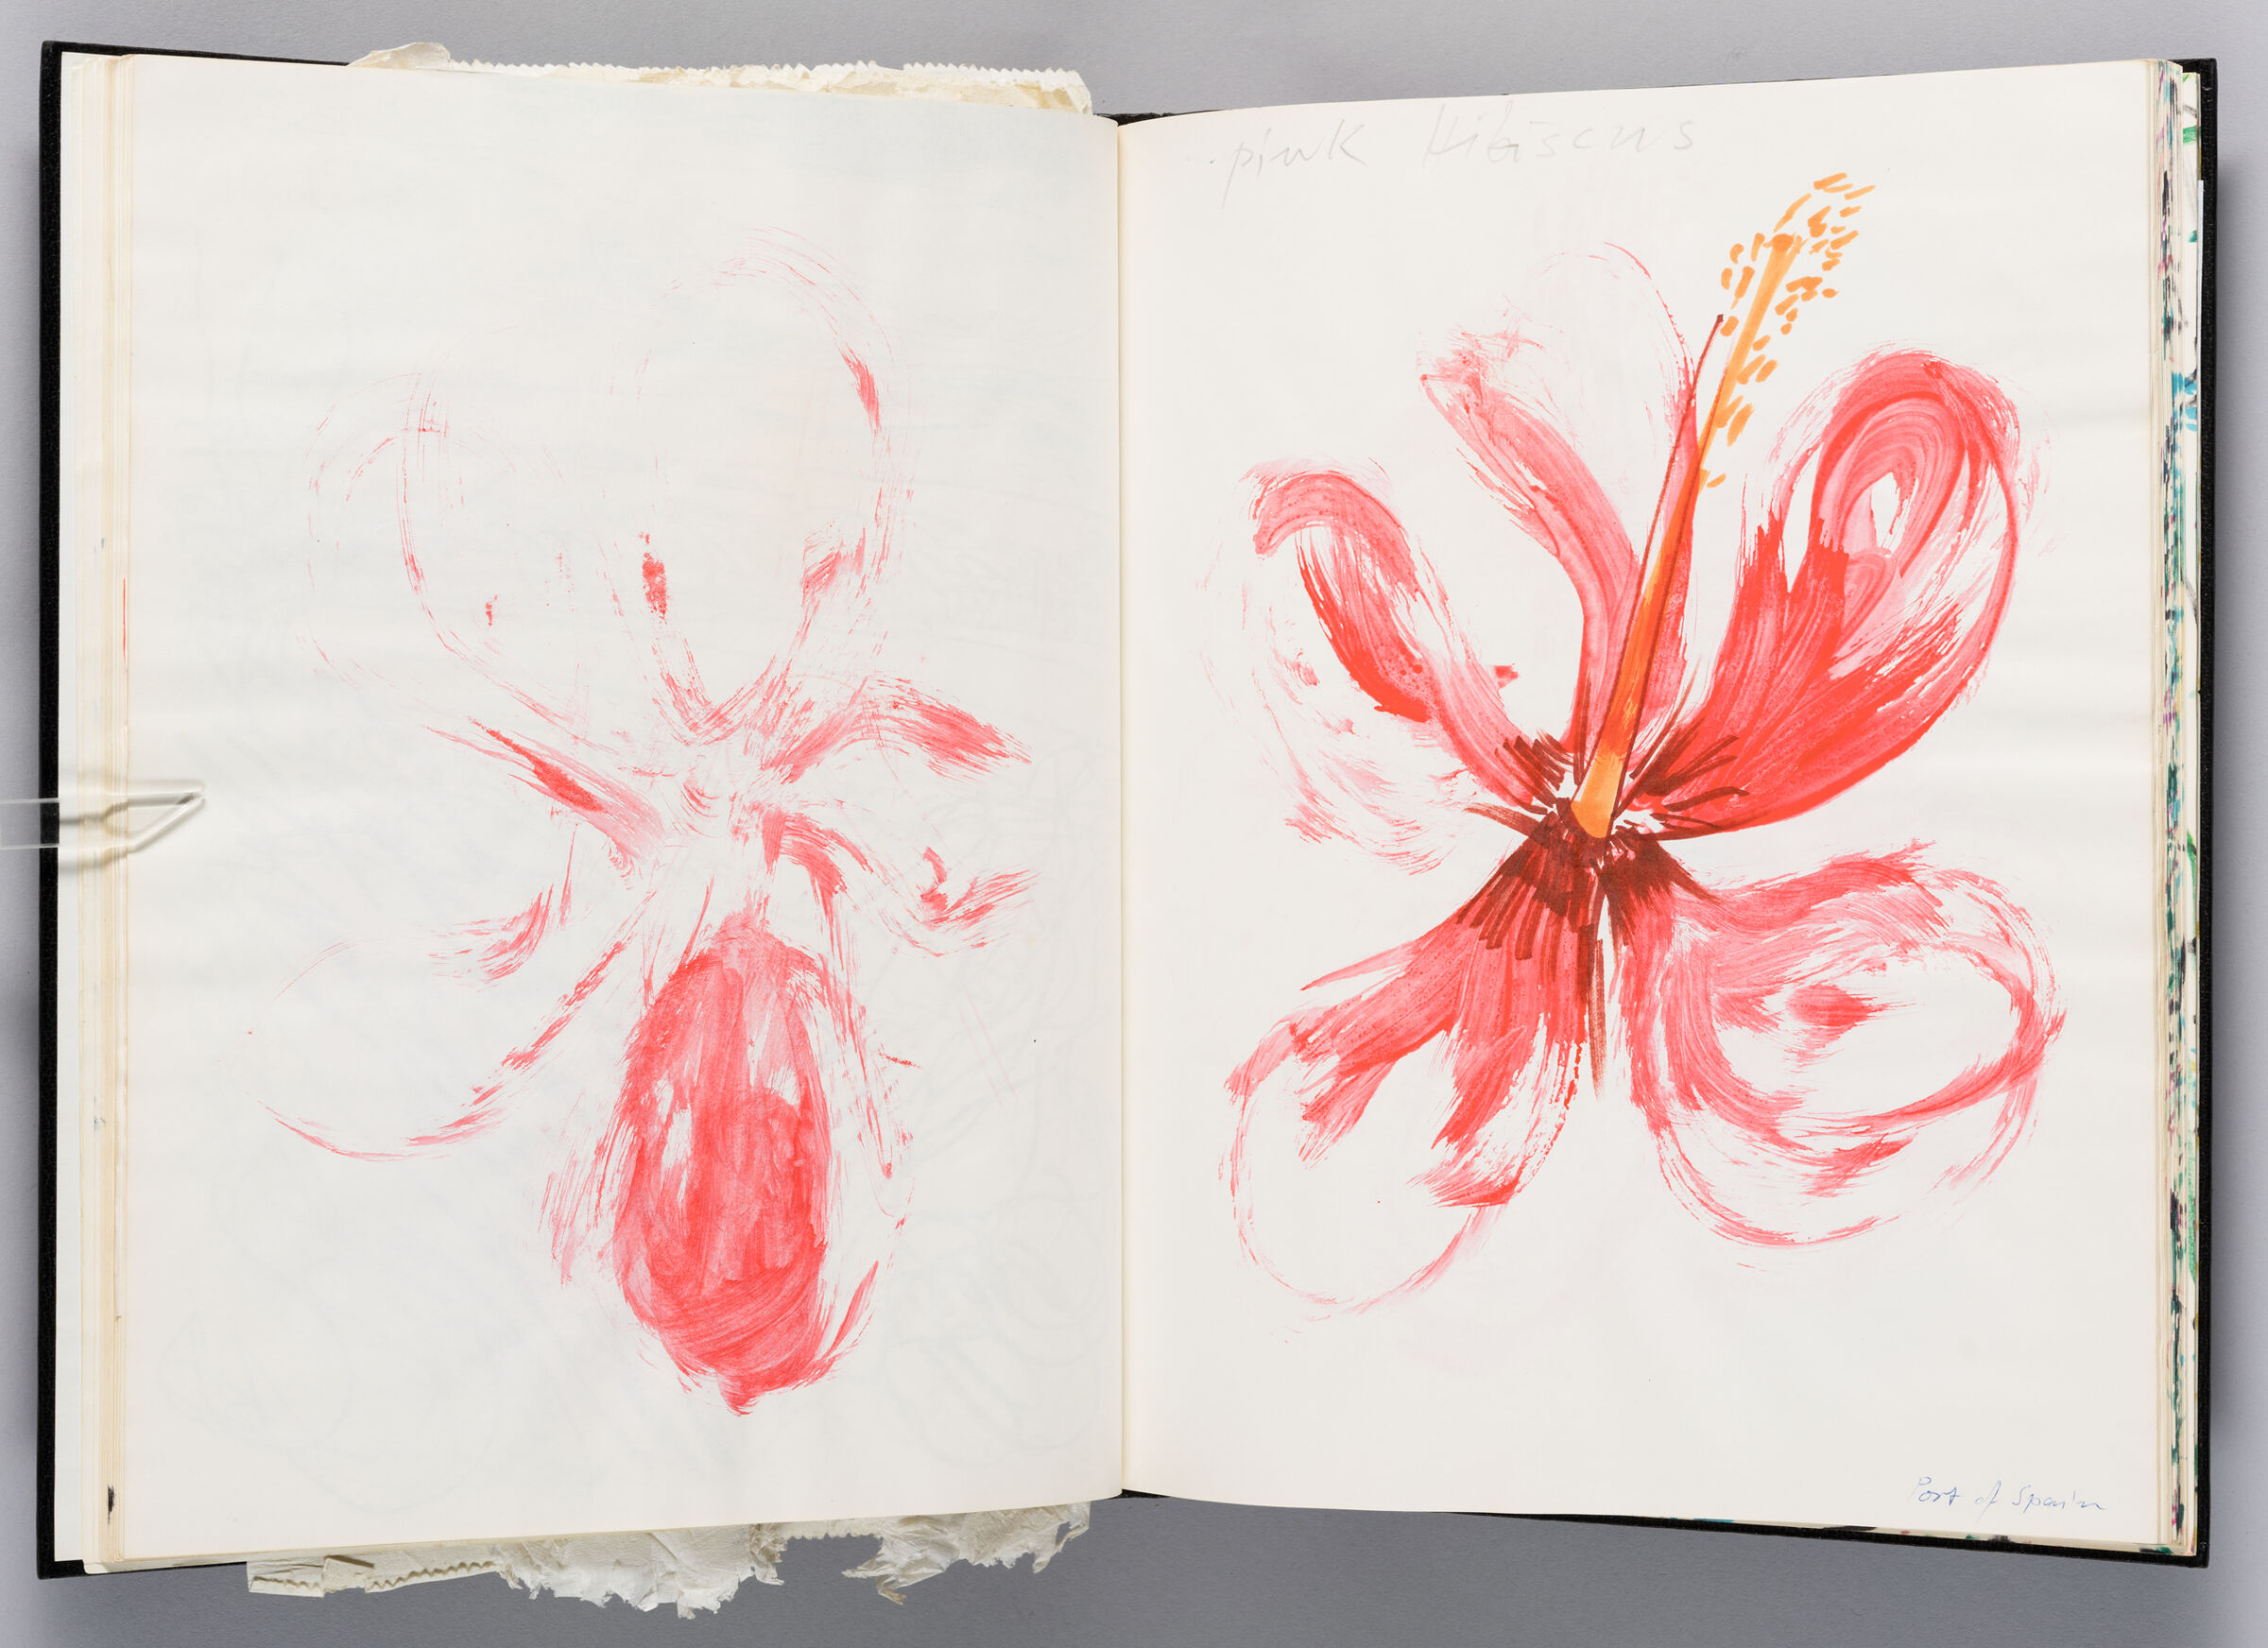 Untitled (Hibiscus Flower, Left Page); Untitled (Hibiscus Flower, Right Page)